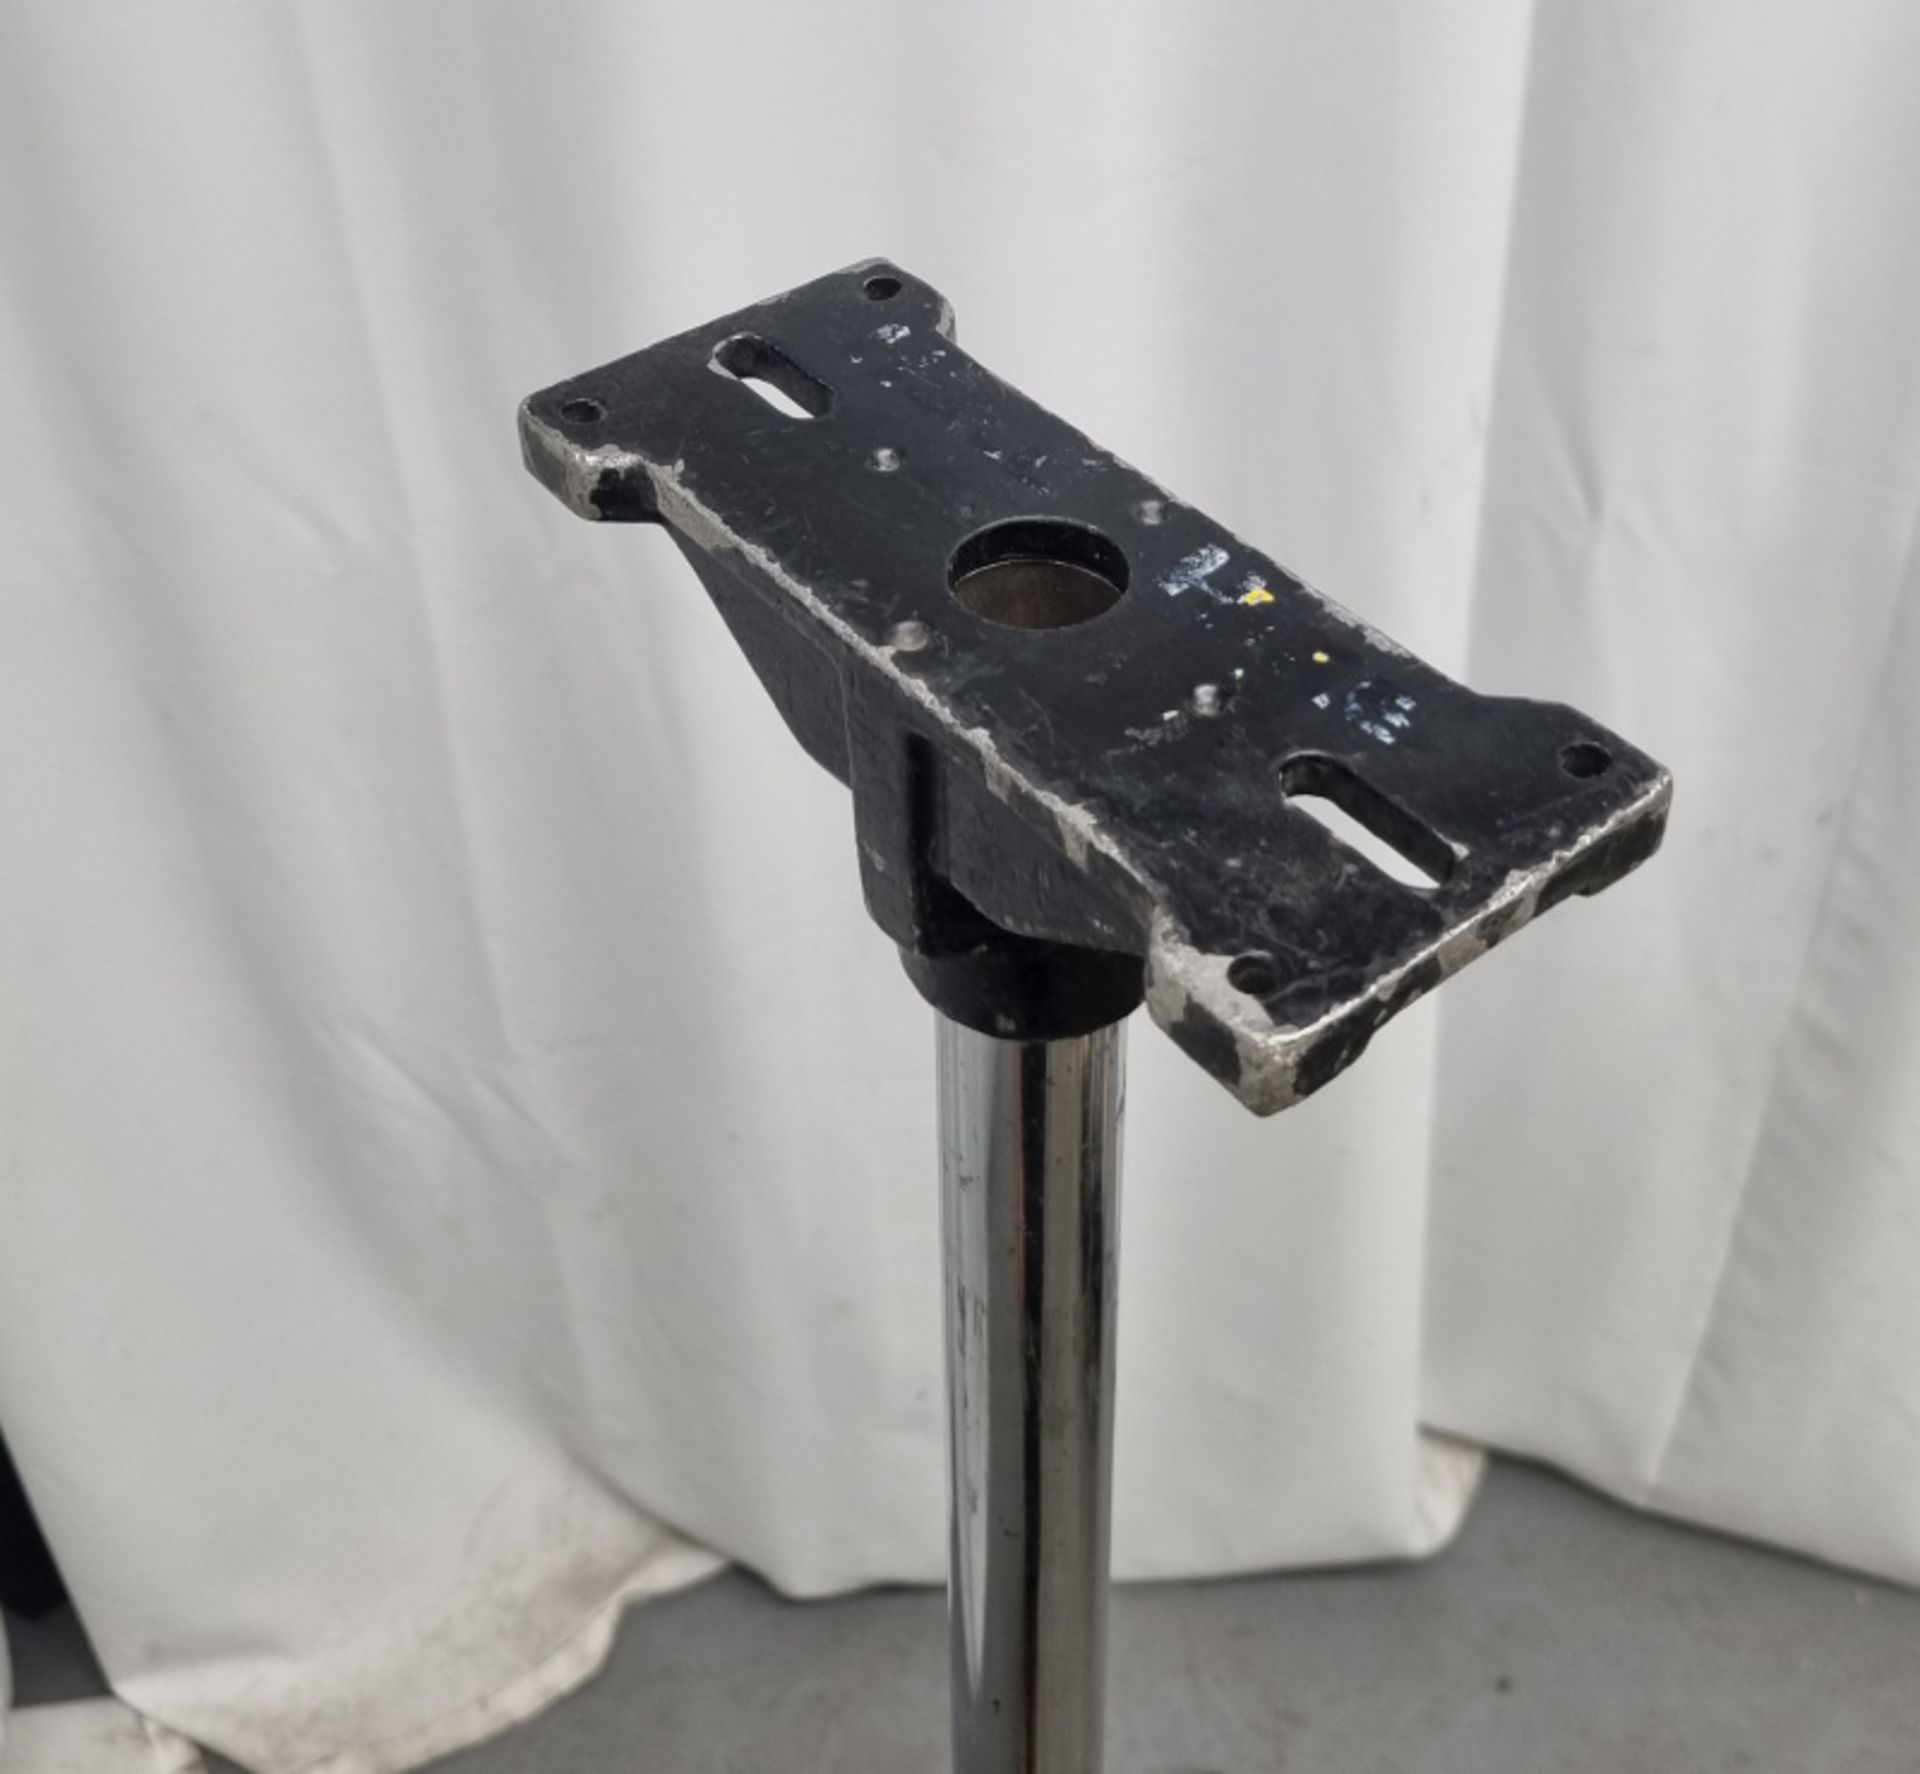 12x Powerdrive Chrome Speaker Stands - non extended height 135cm - Image 4 of 4